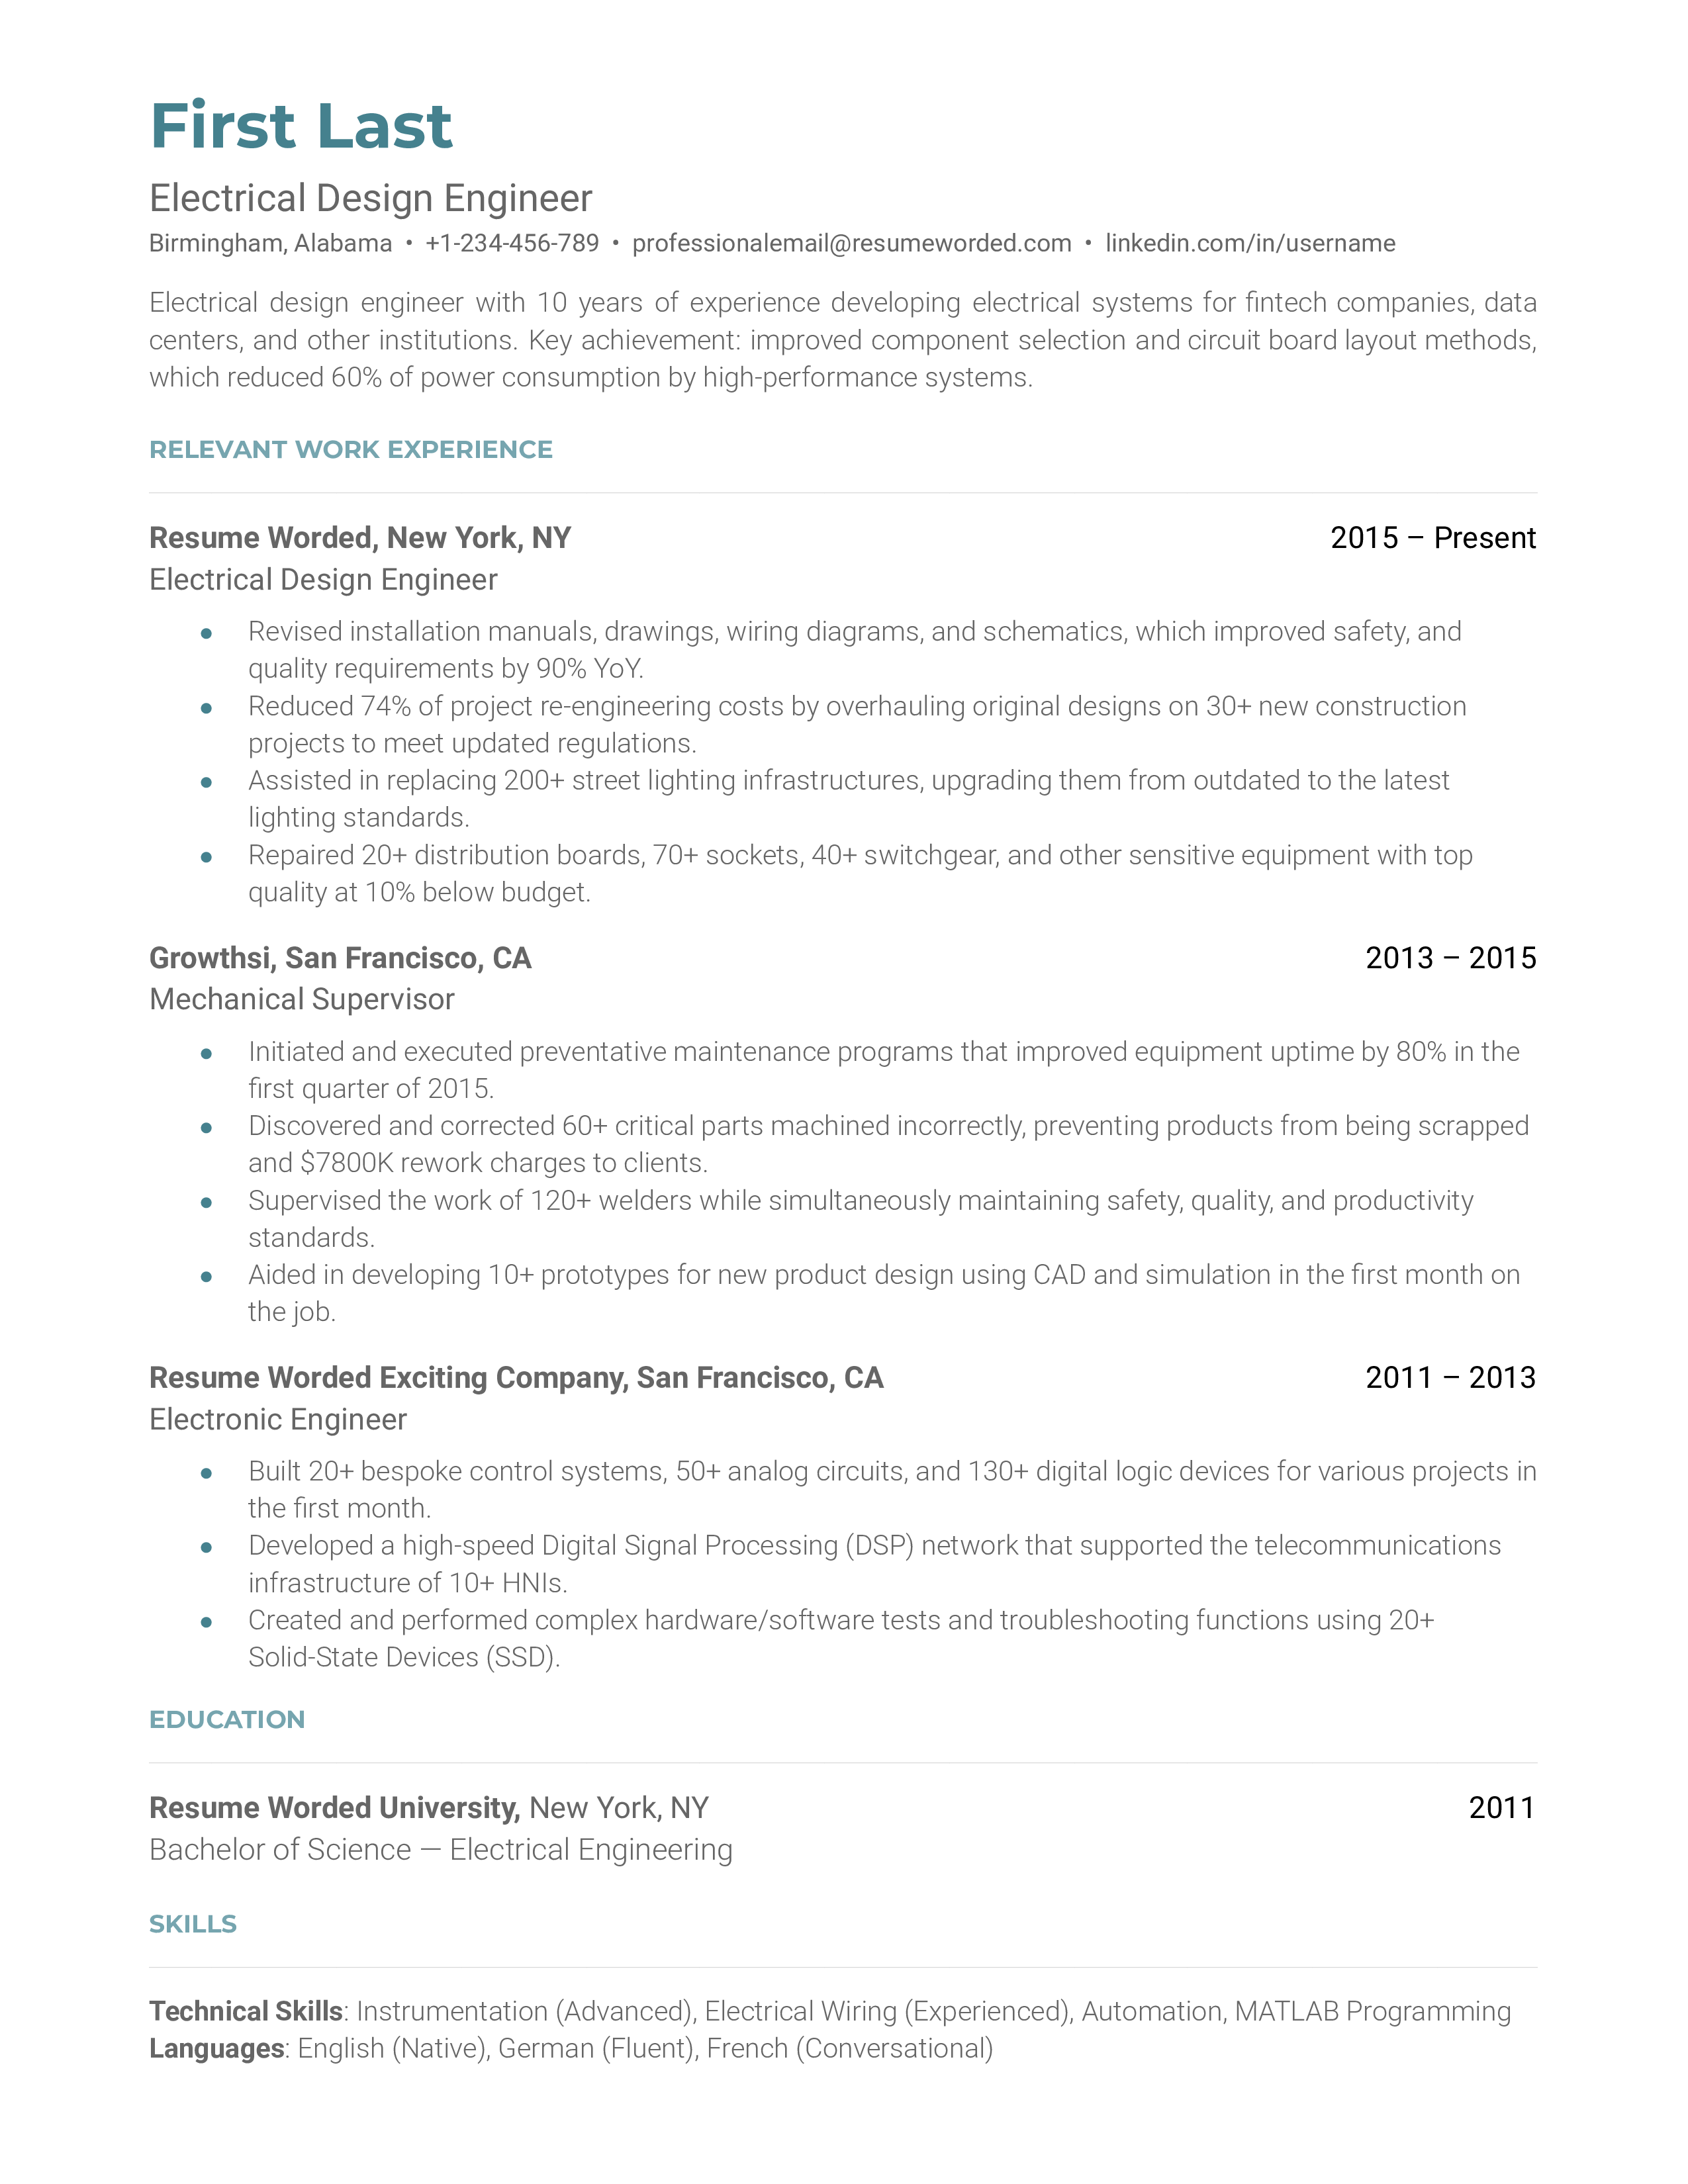 An Electrical Design Engineer resume emphasizing experience in designing electrical systems, using design software, and collaborating with teams to bring designs to life